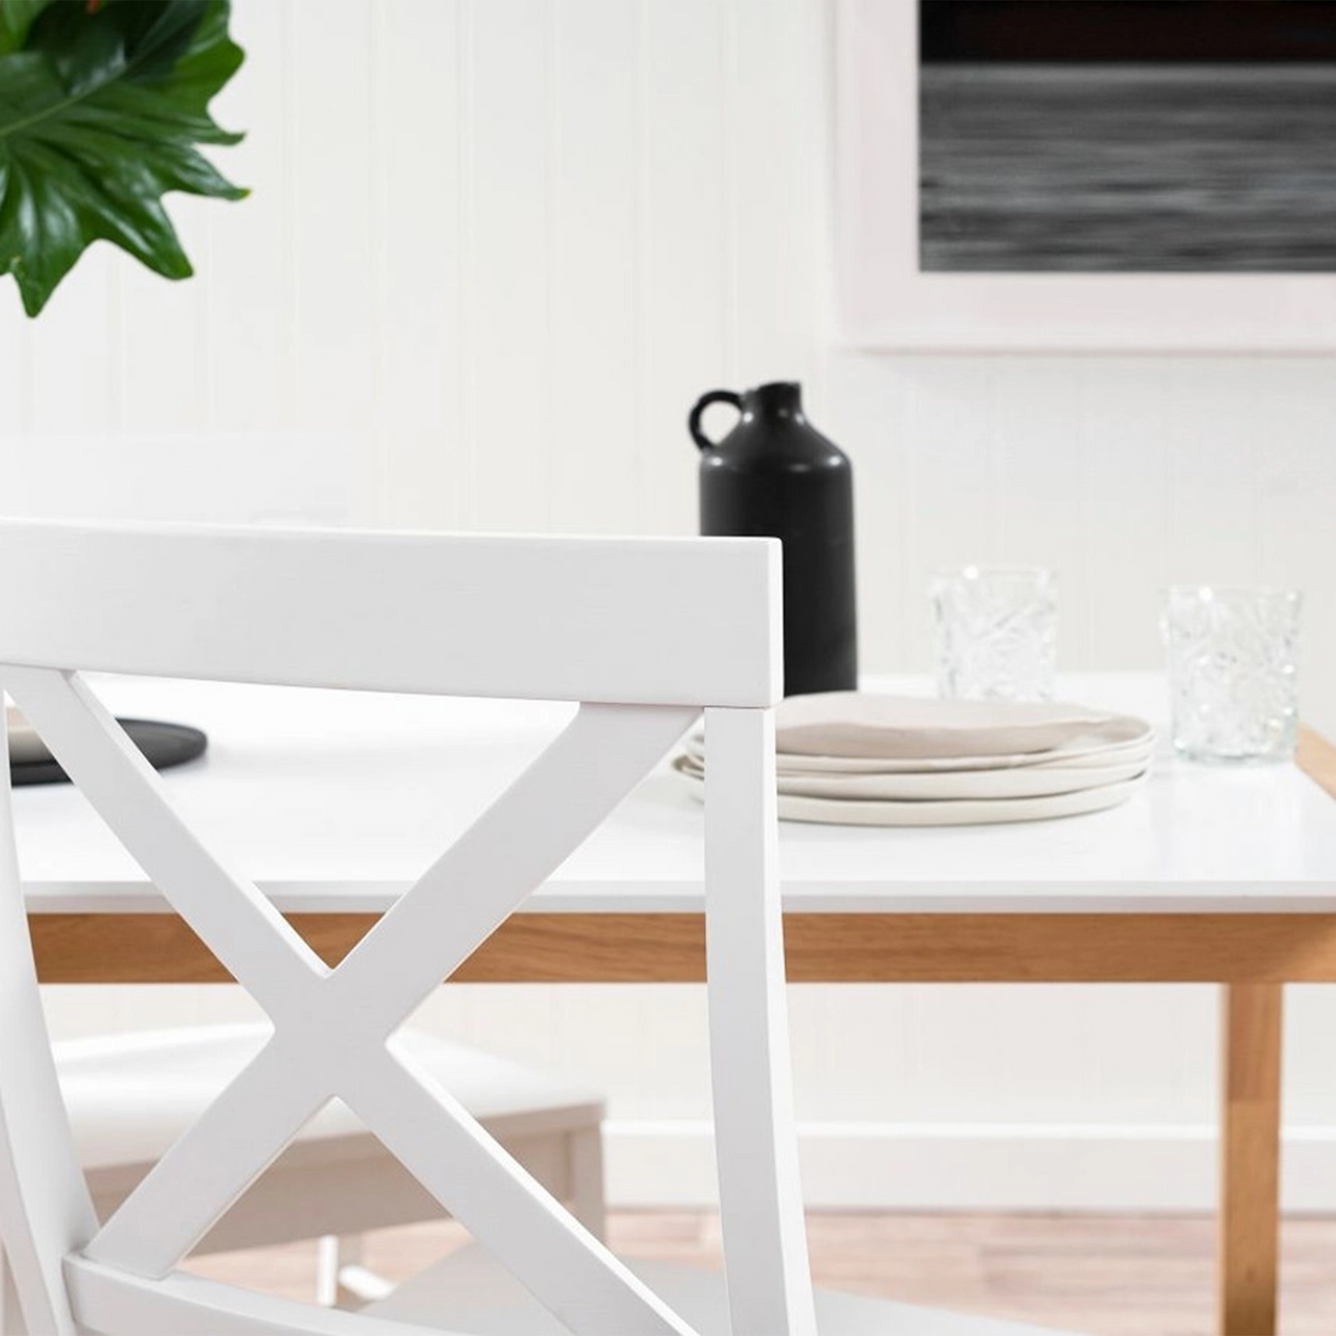 White Wooden Dining Chair